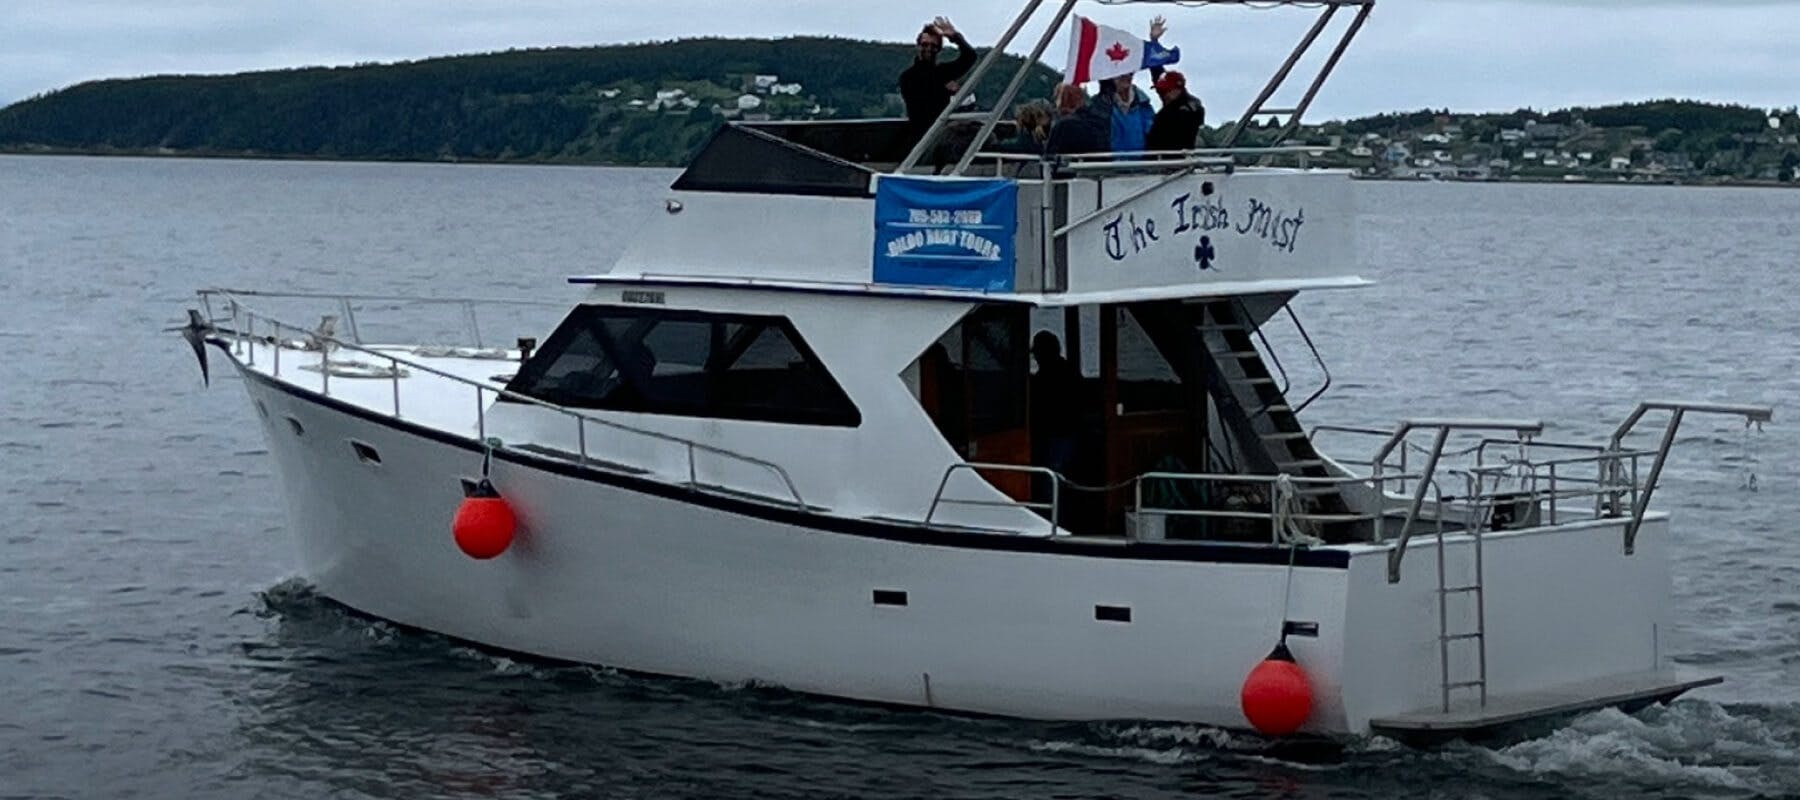 A tour boat on the water with people on the top deck celebrating and waving a Canadian flag.